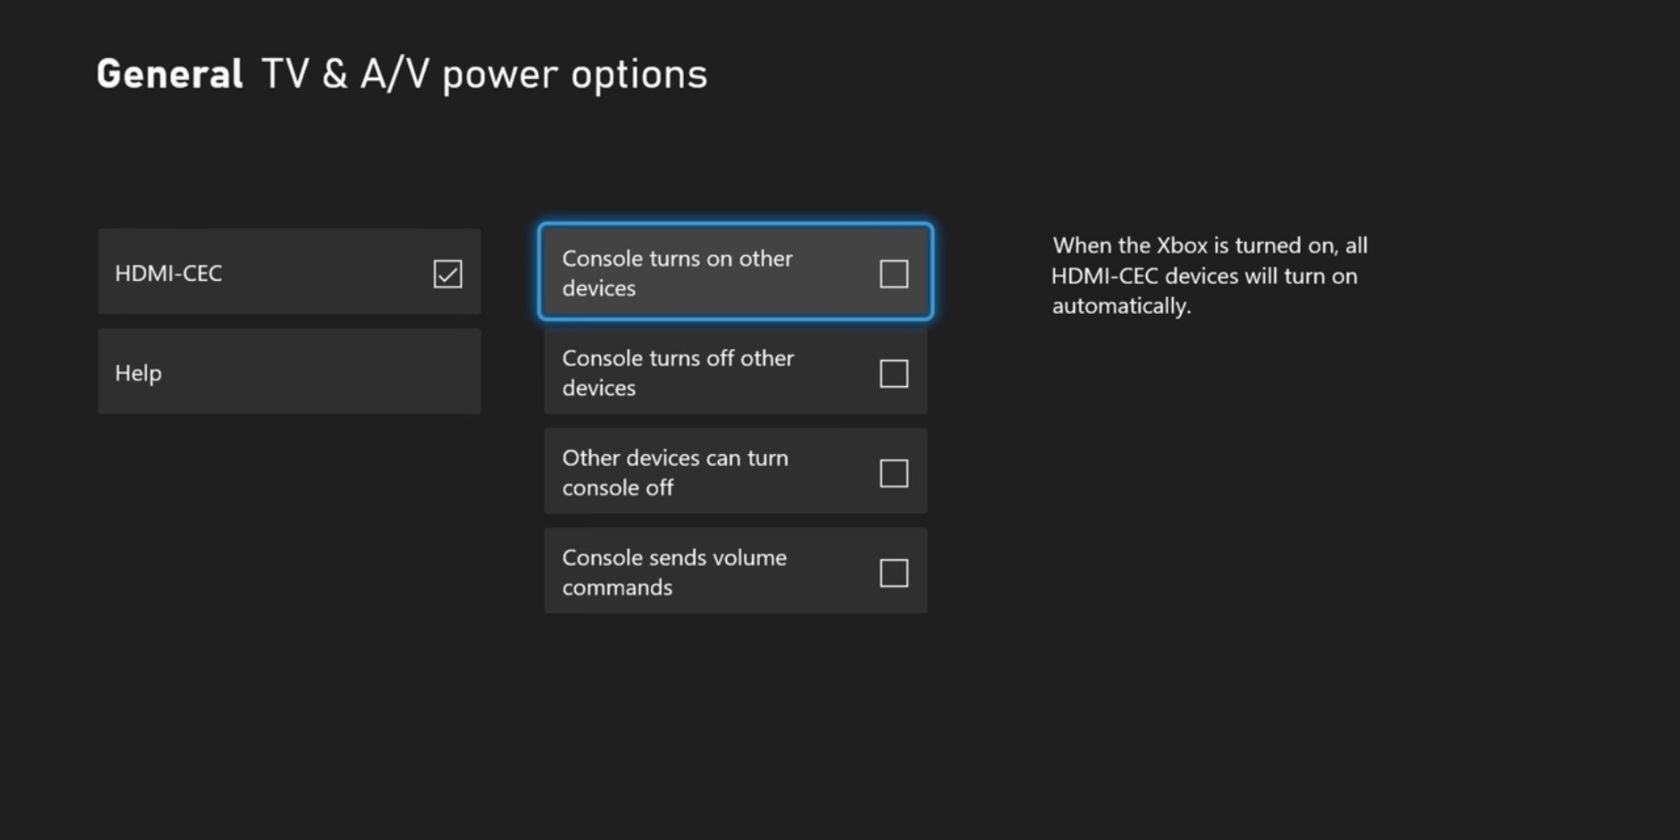 Xbox Series X settings to turn on the TV with the console